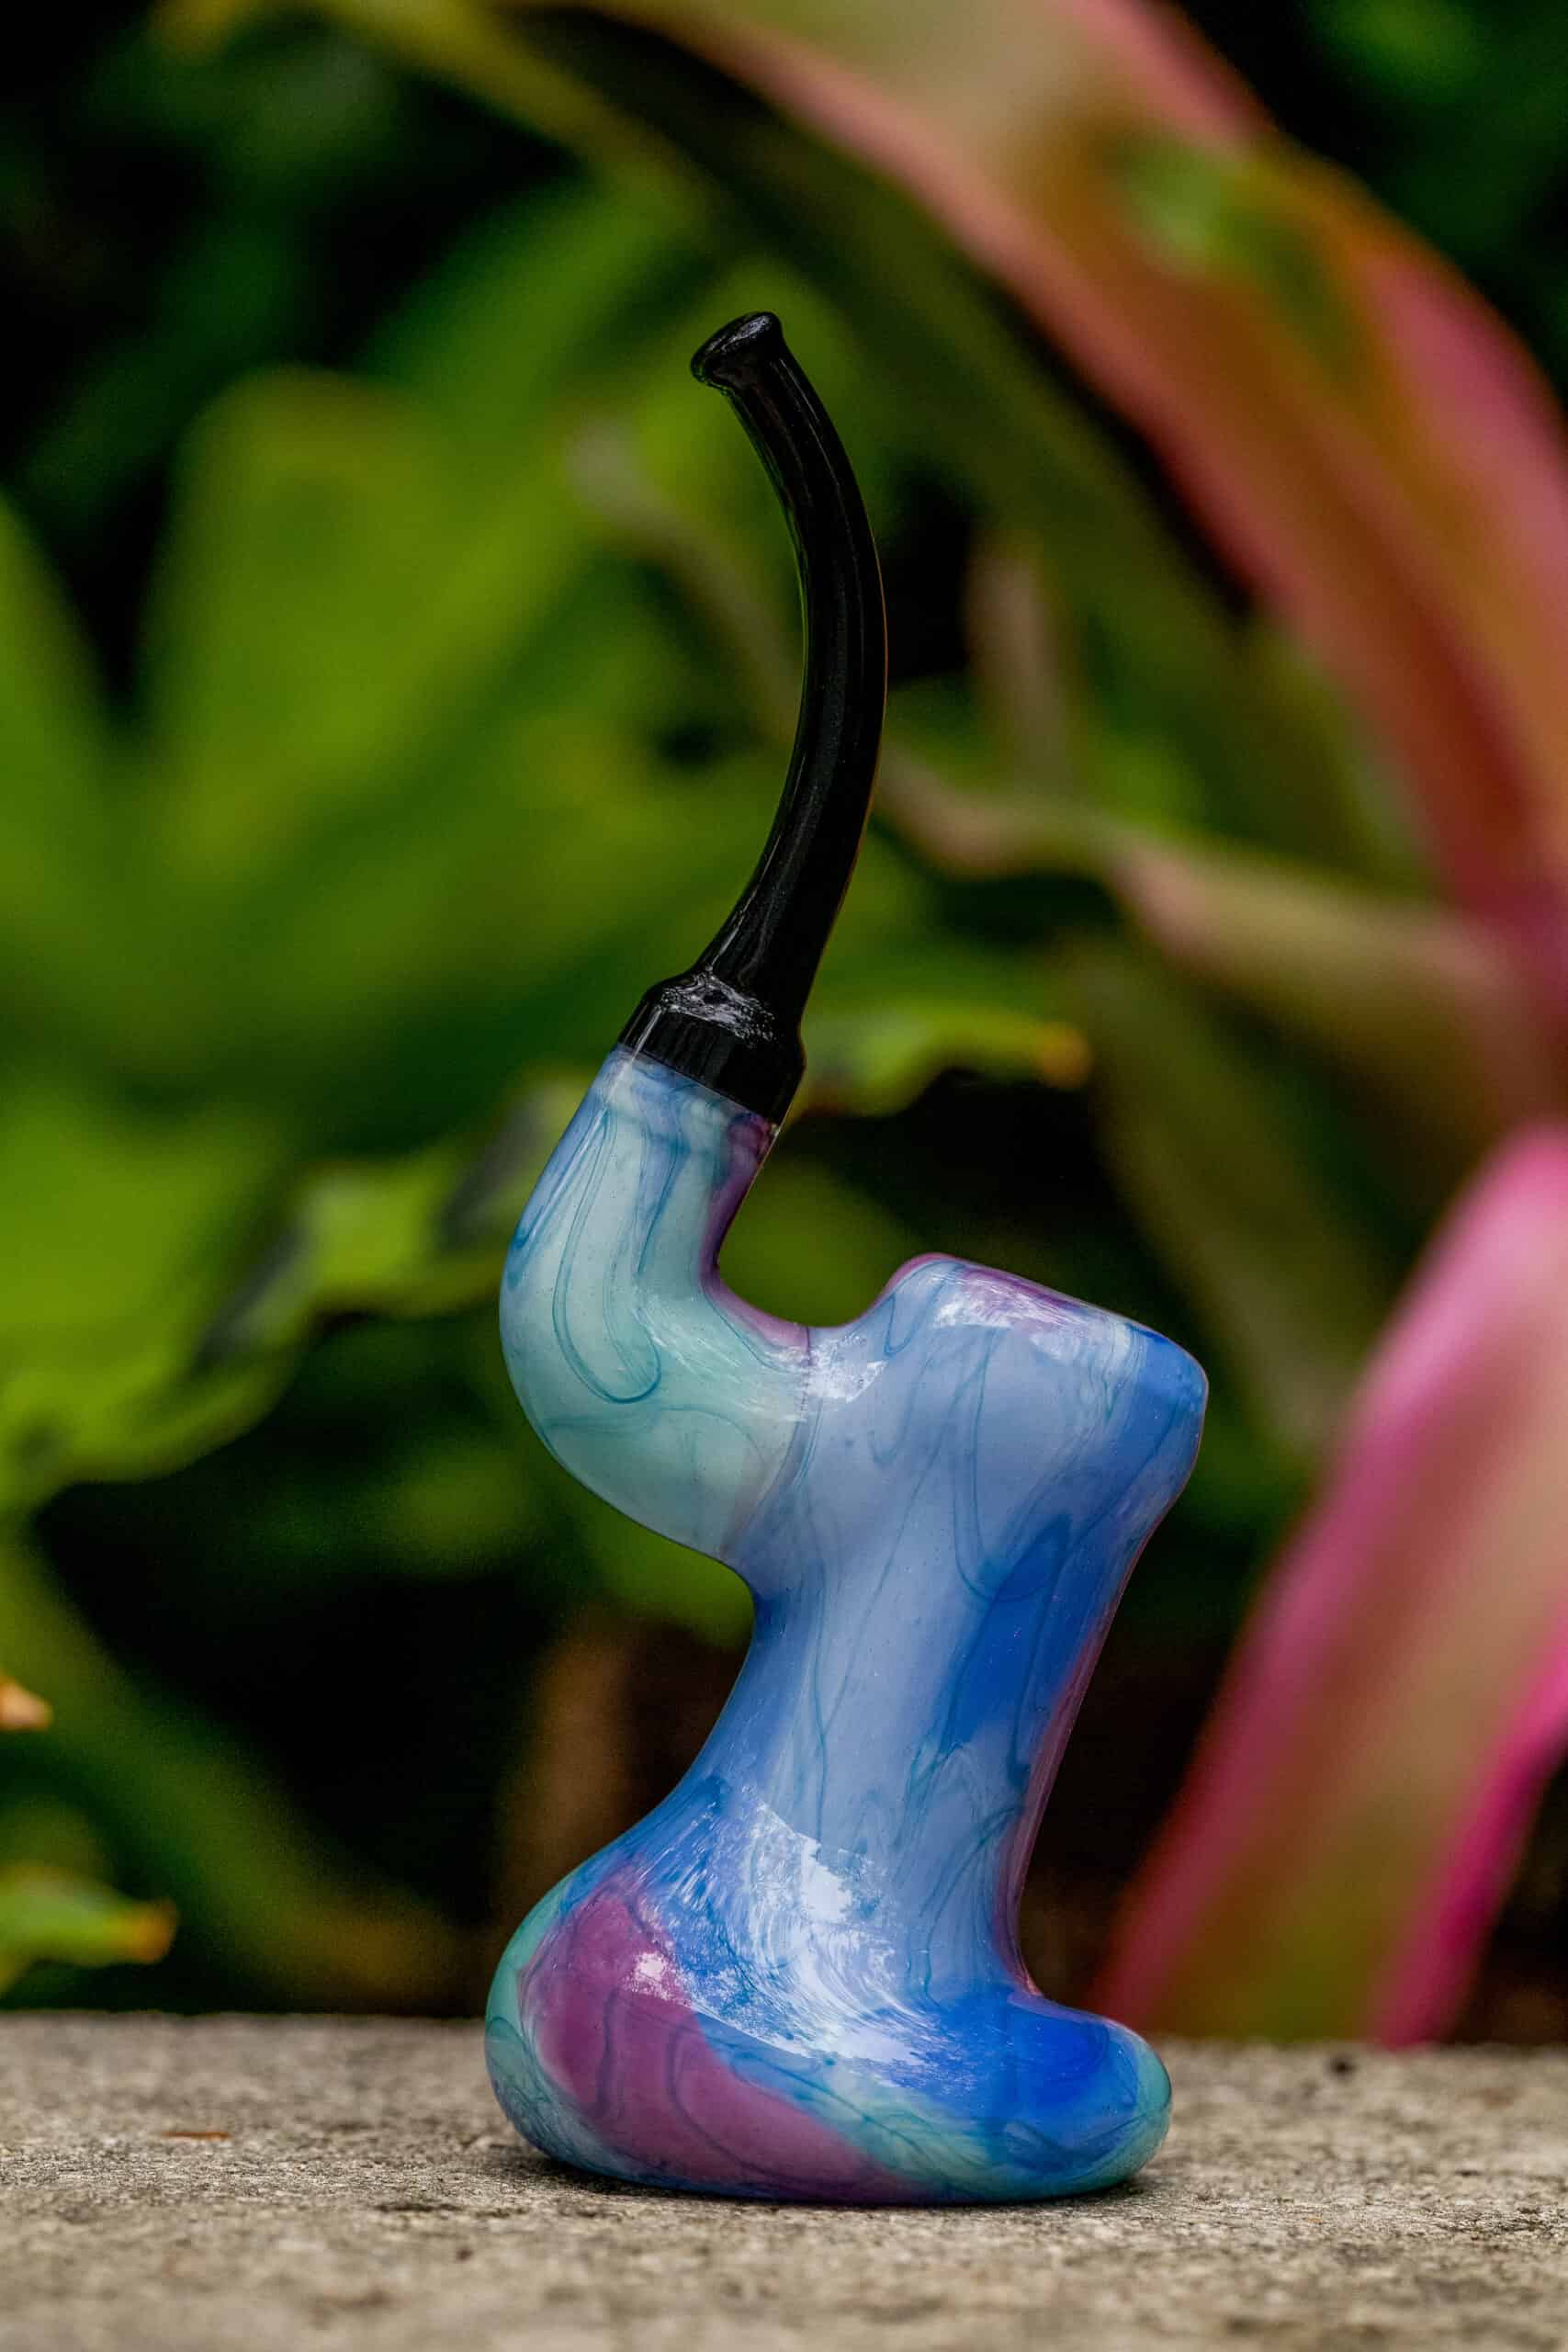 exquisite design of the Crushed Opal Scribble Watson Rig by Scomo Moanet